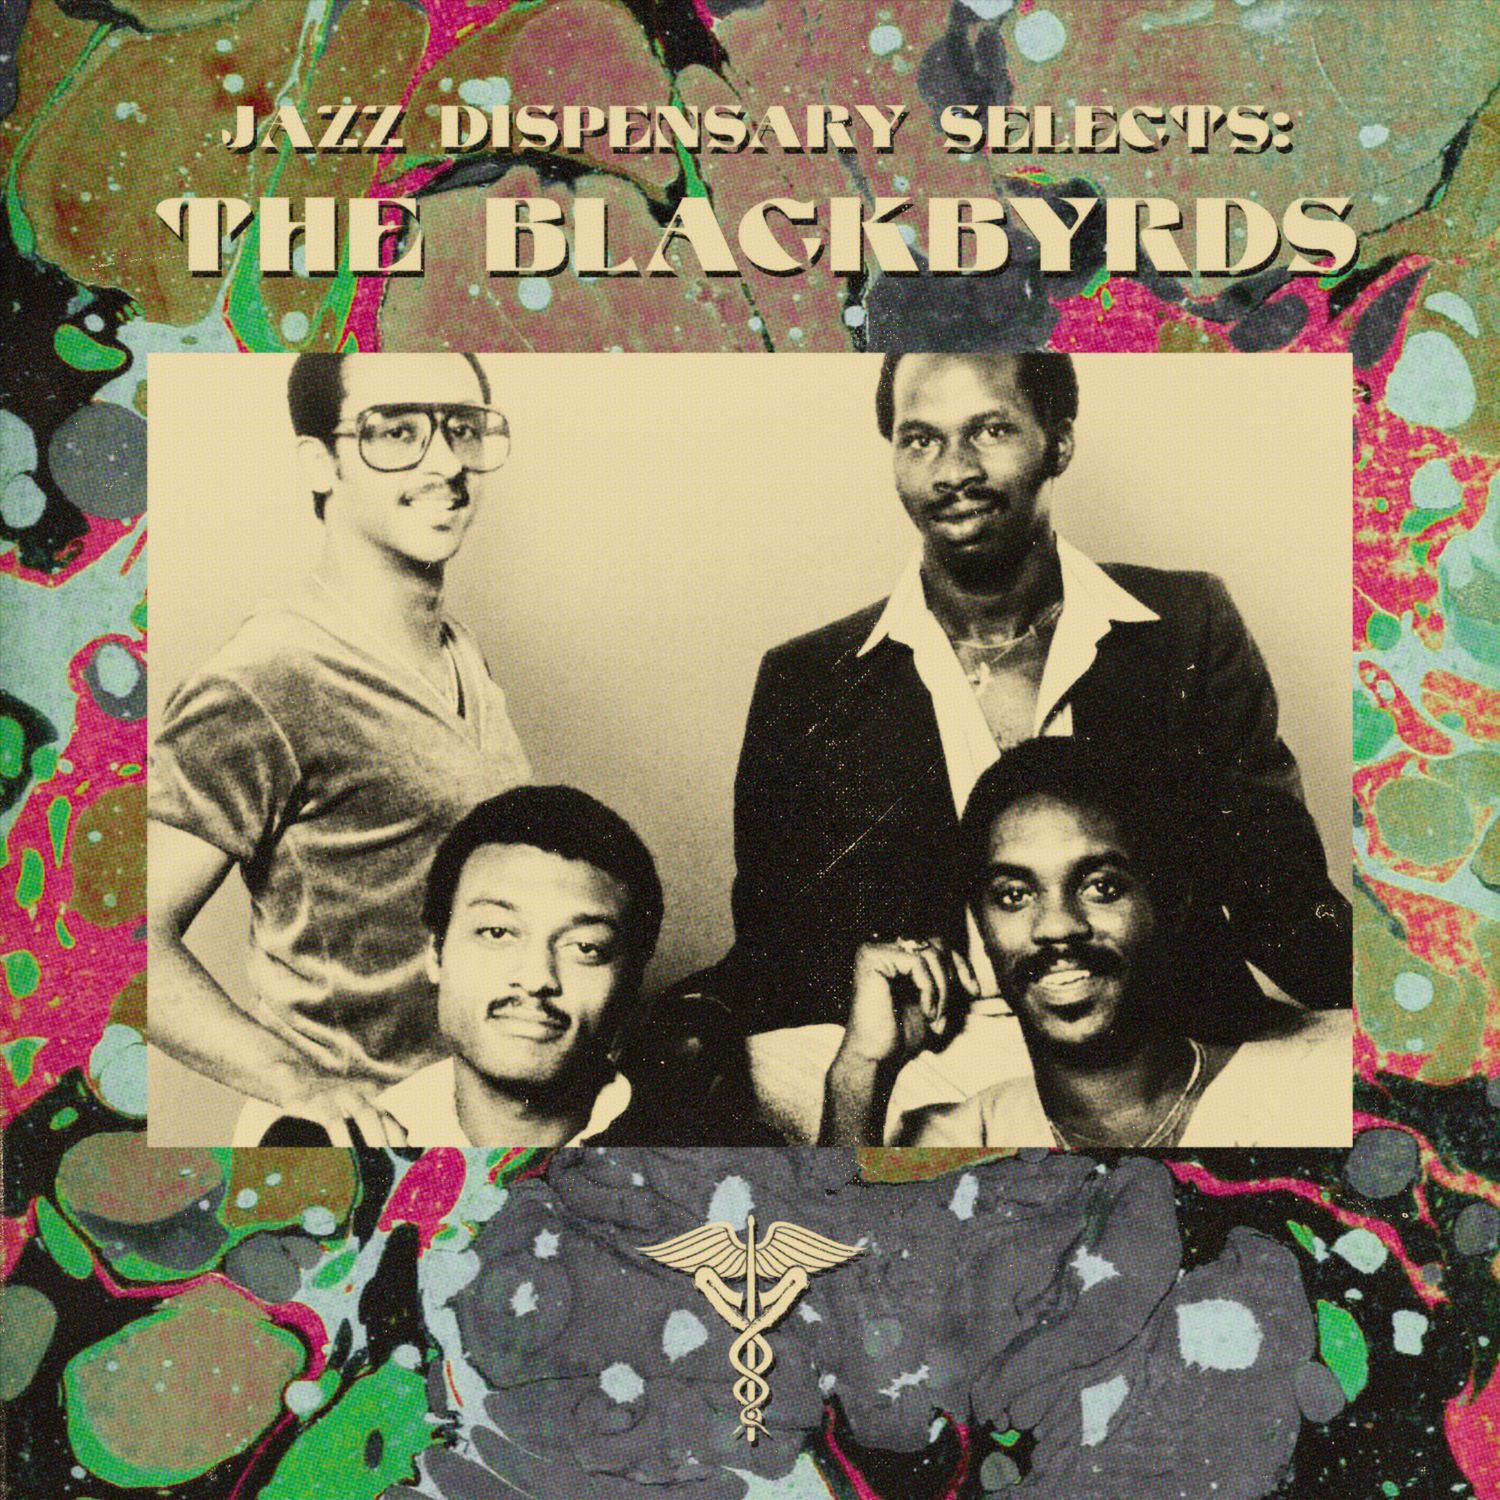 Featured image for “Jazz Dispensary Selects: The Blackbyrds”